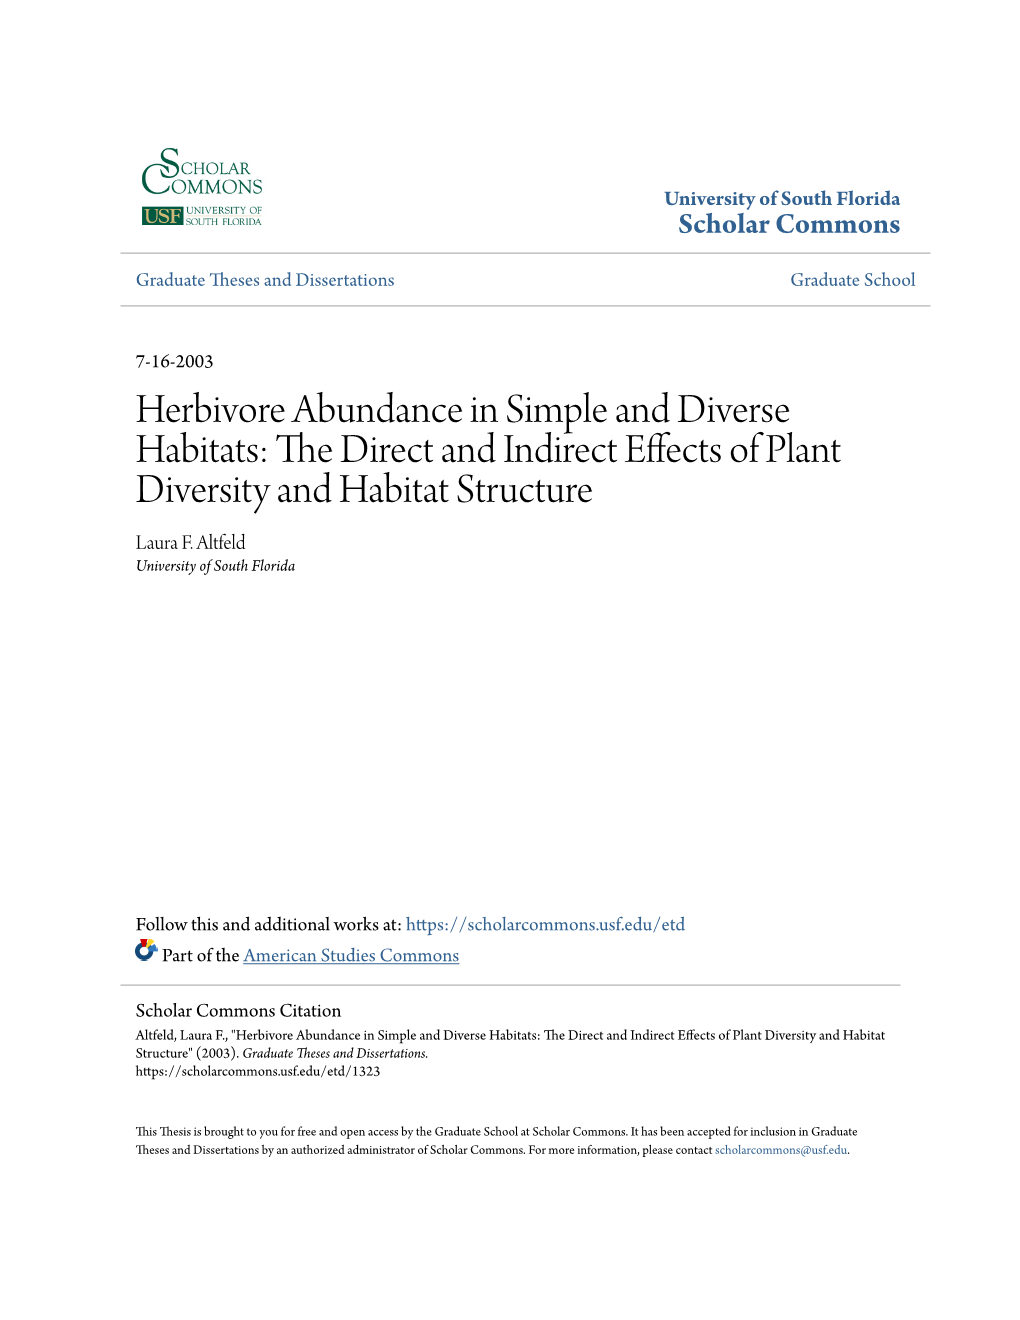 Herbivore Abundance in Simple and Diverse Habitats: the Direct and Indirect Effects of Plant Diversity and Habitat Structure Laura F